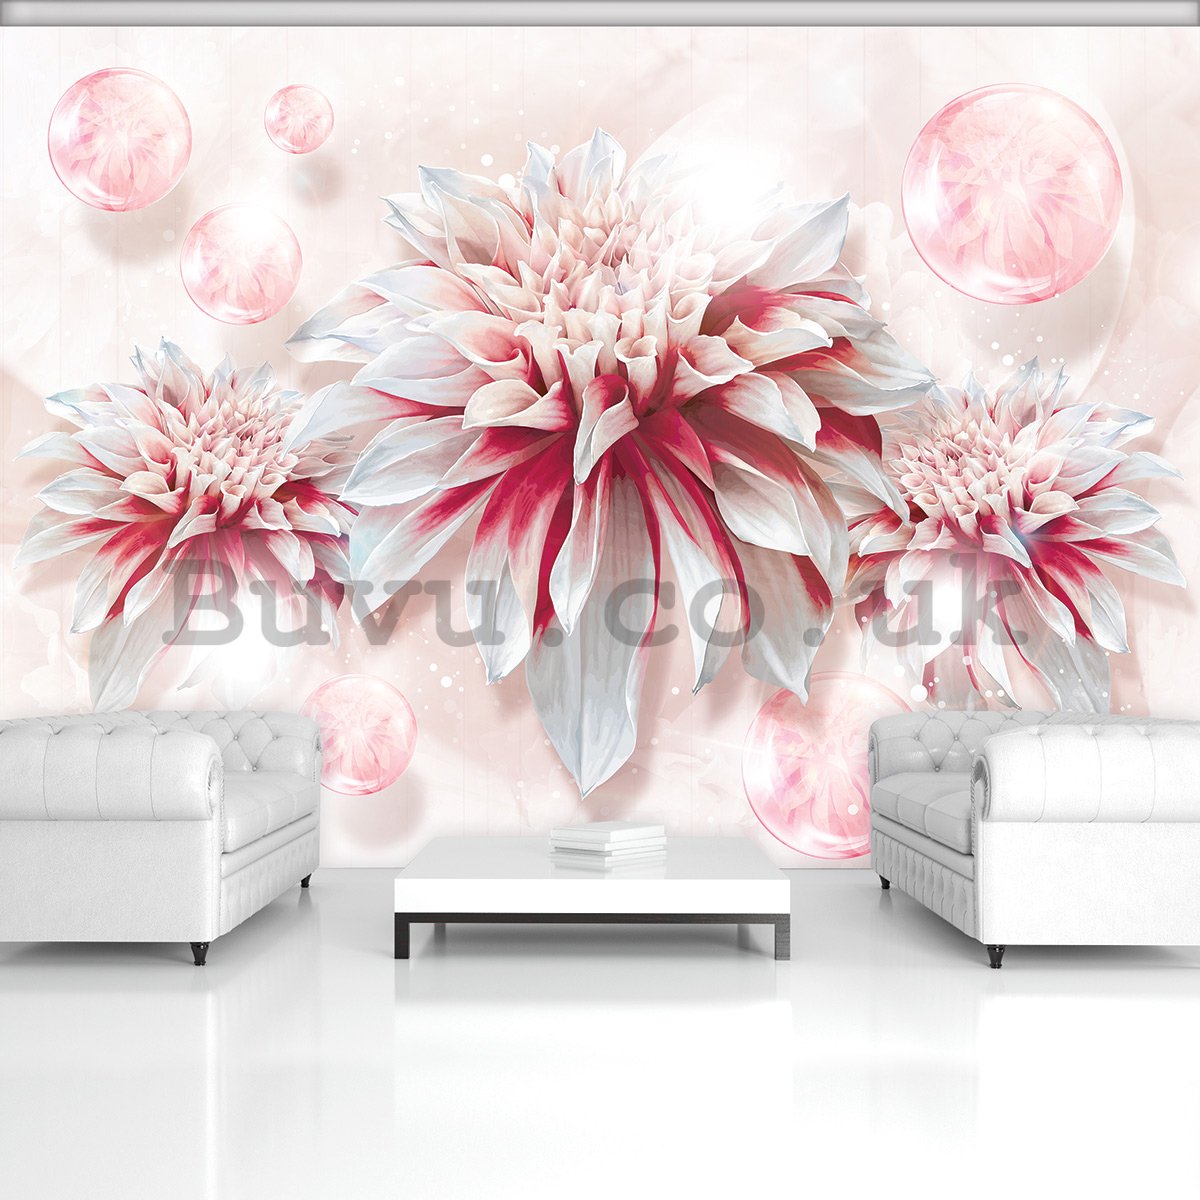 Wall Mural: Astra - 184x254 cm